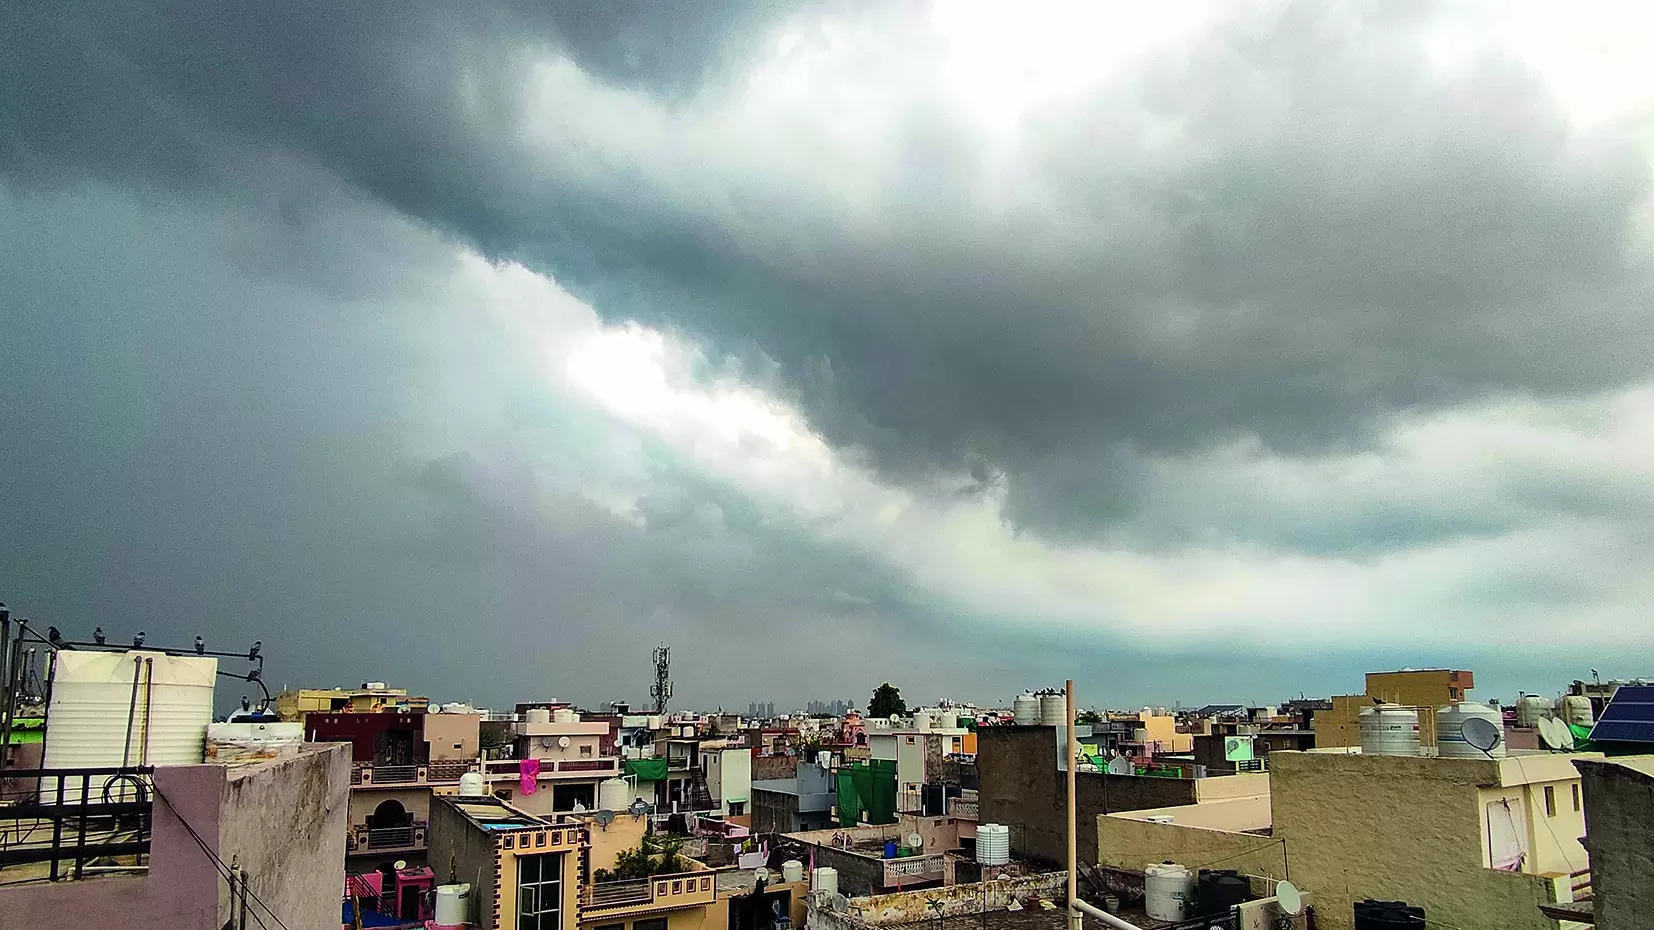 Mercury rises by 3.5°C in one day, but expect more rain next week